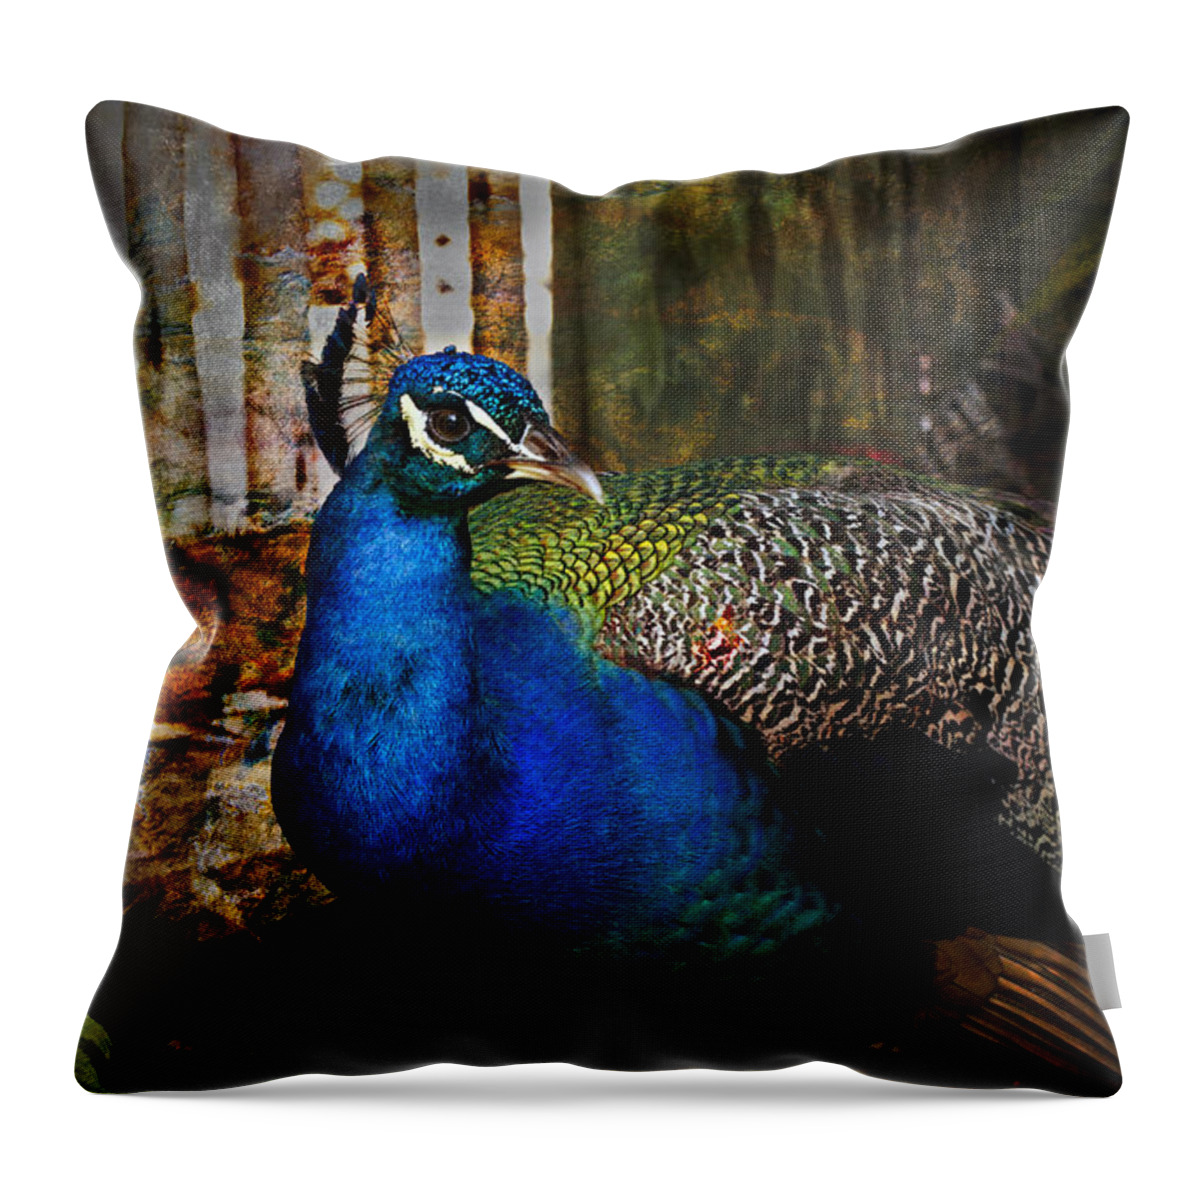 Animals Throw Pillow featuring the photograph The Beauty by Debra and Dave Vanderlaan